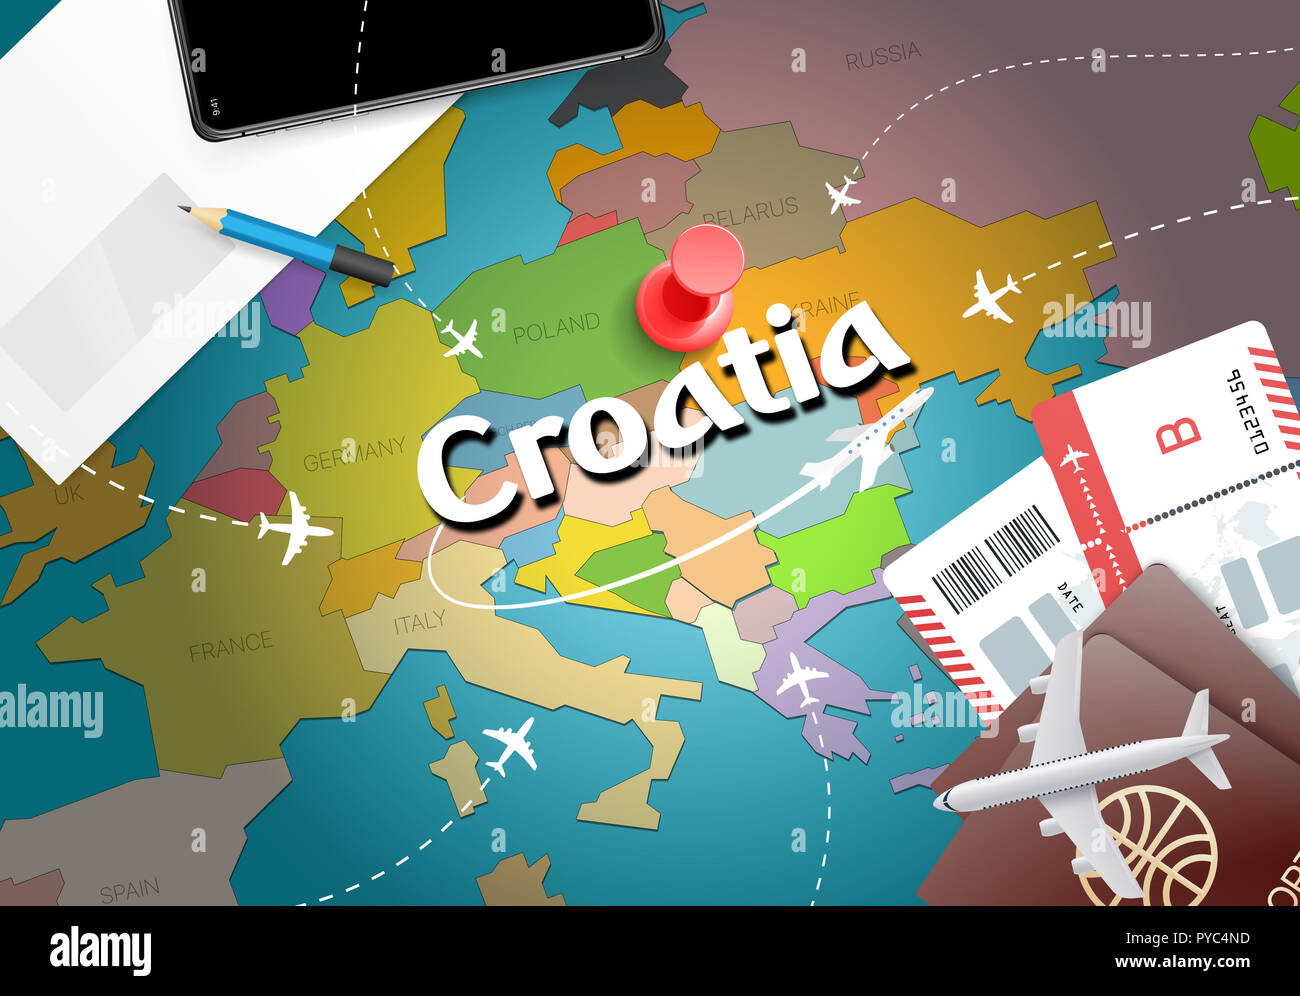 Croatia travel concept map background with planes, tickets. Visit Croatia travel and tourism destination concept. Croatia flag on map. Planes and flig Stock Photo